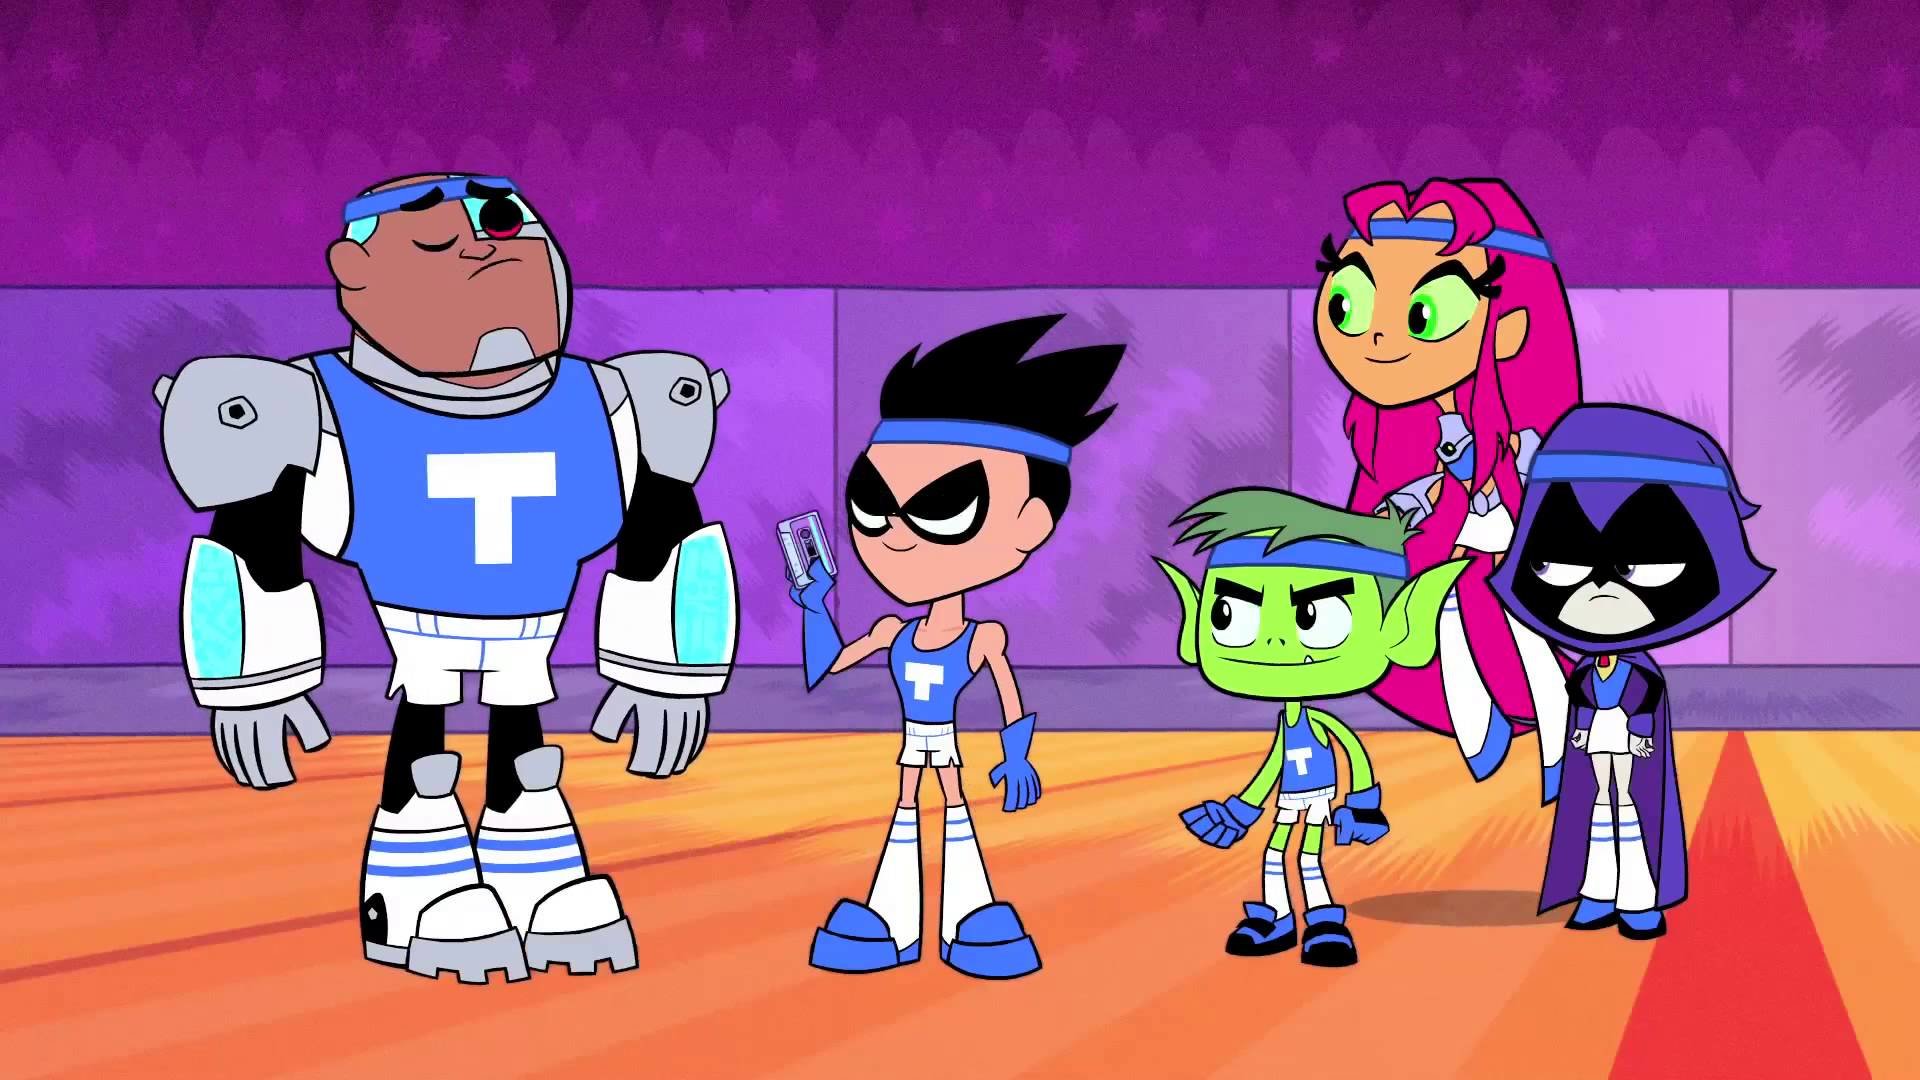 Download full hd 1080p Teen Titans Go! PC background ID:237634 for free